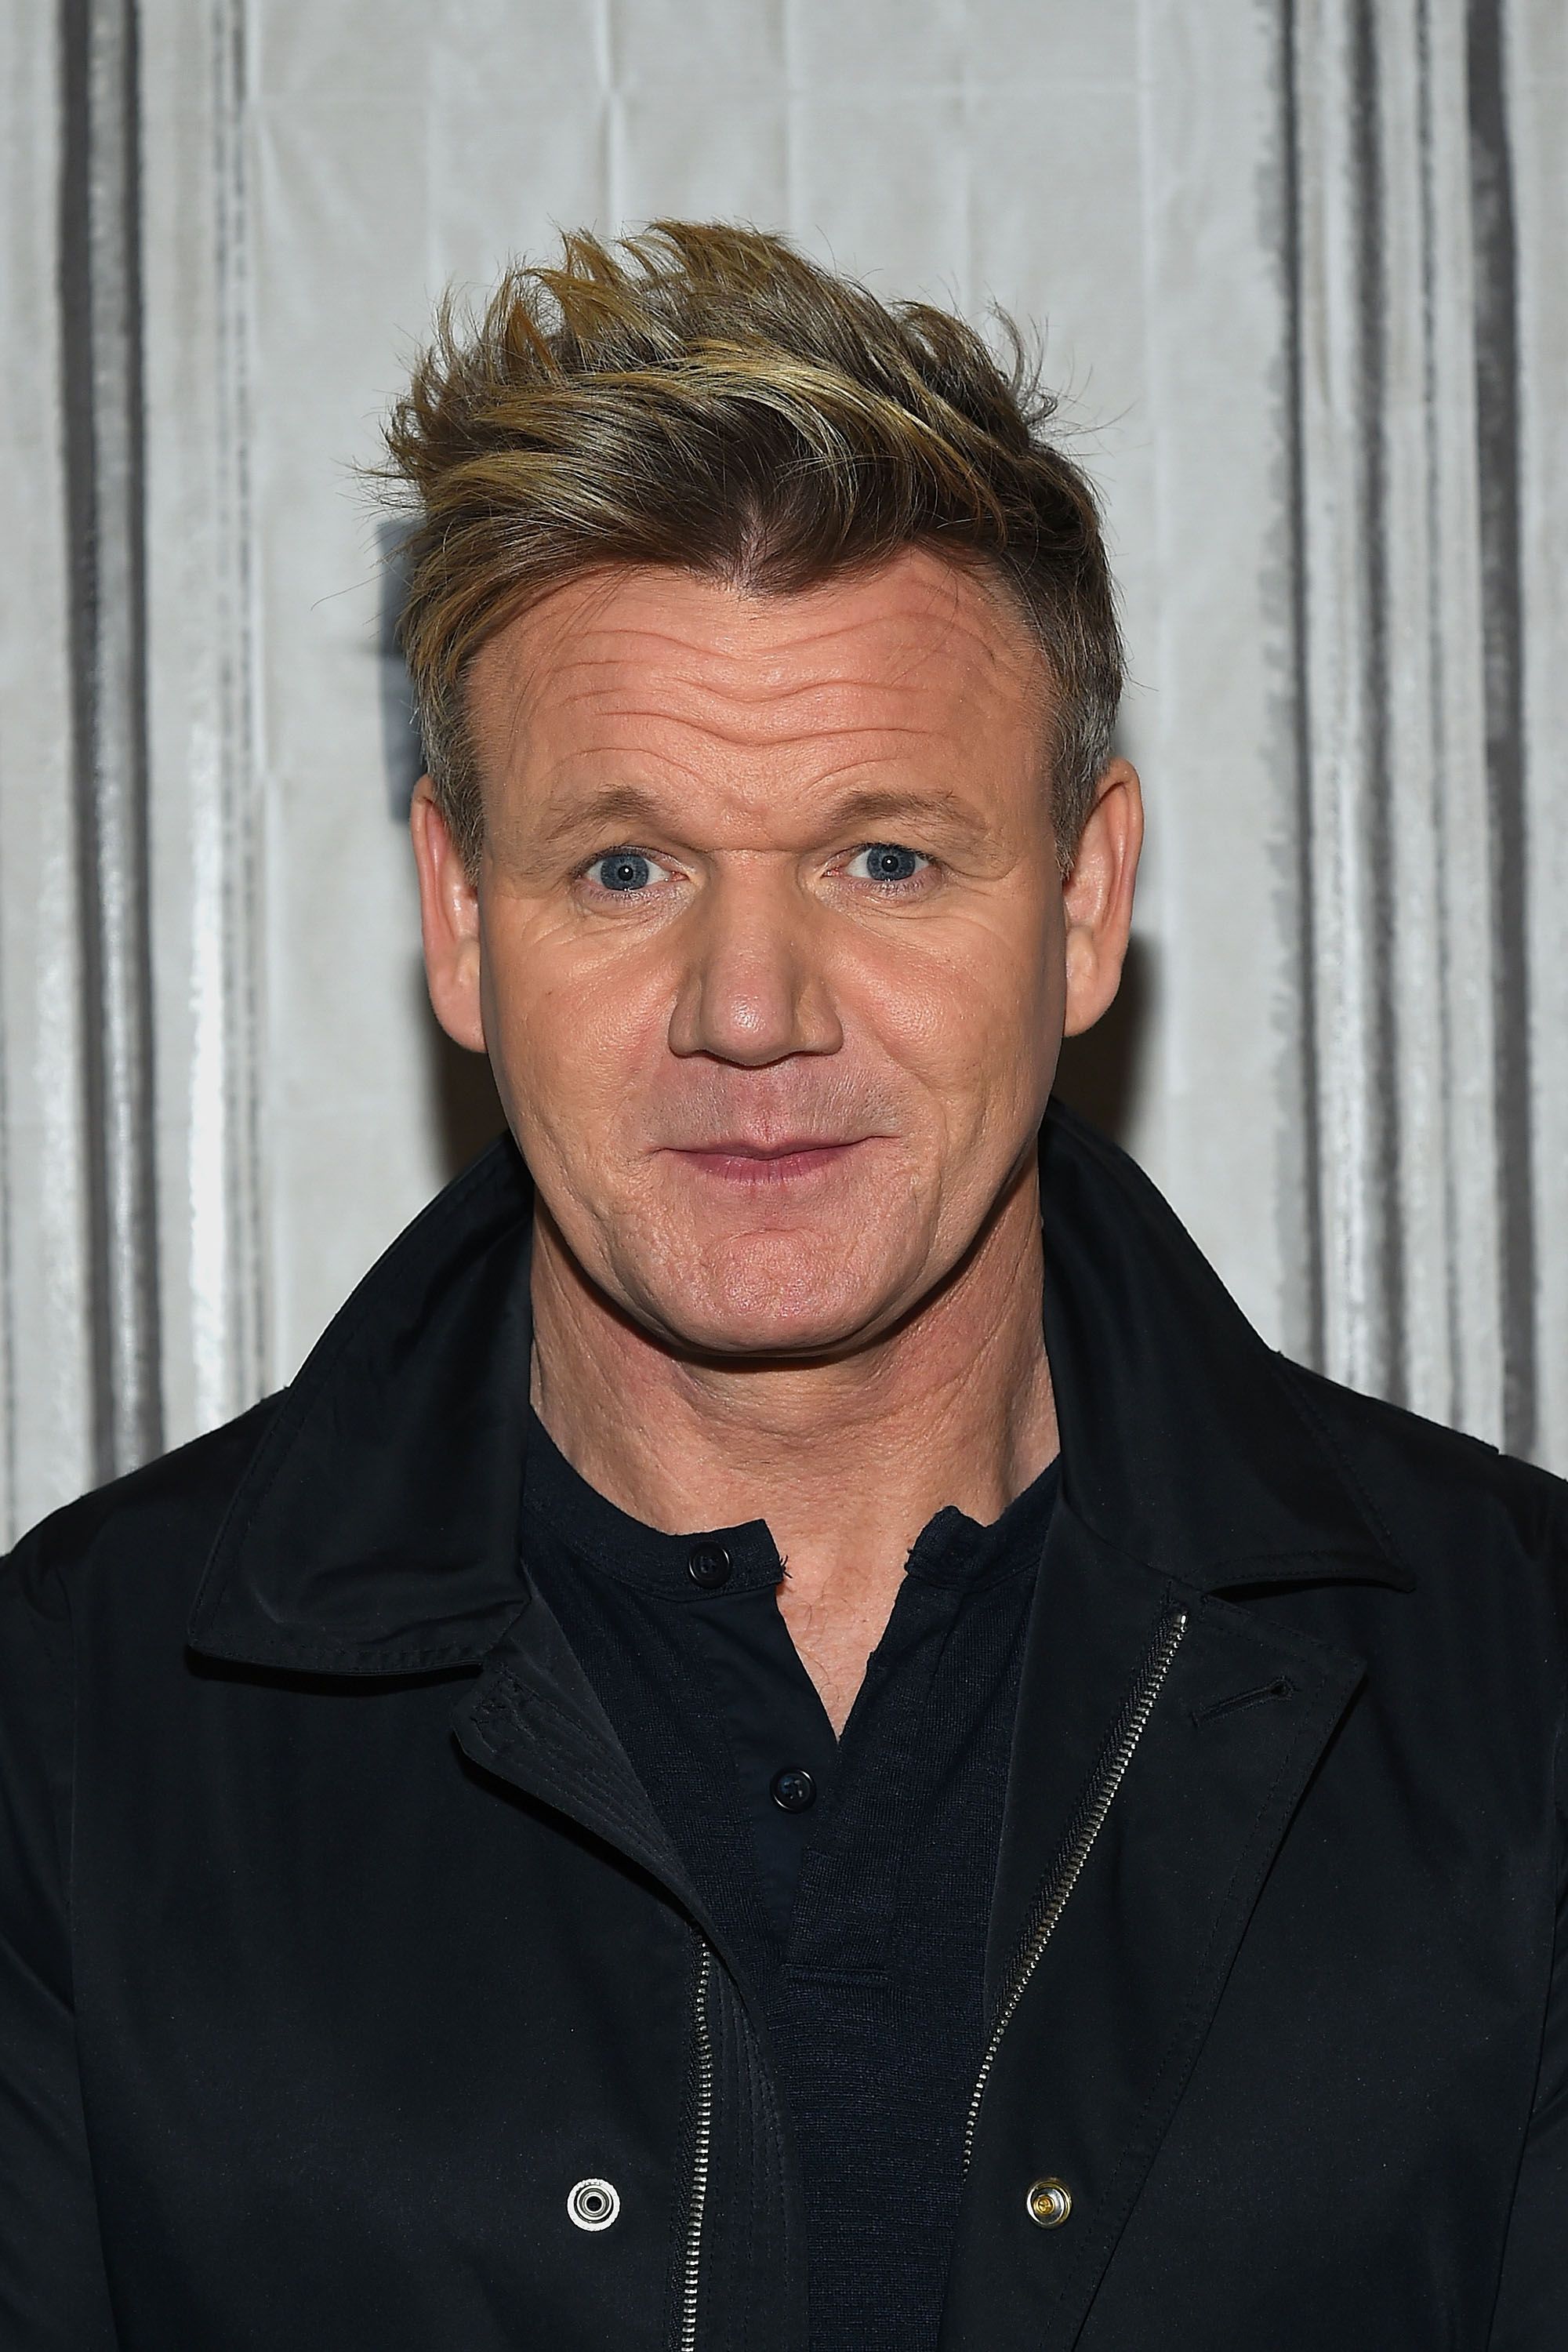 ordon Ramsay at the Build Series to discuss "MasterClass: Gordon Ramsay Teaches Cooking" at Build Studio on February 3, 2017 in New York City | Photo: Getty Images